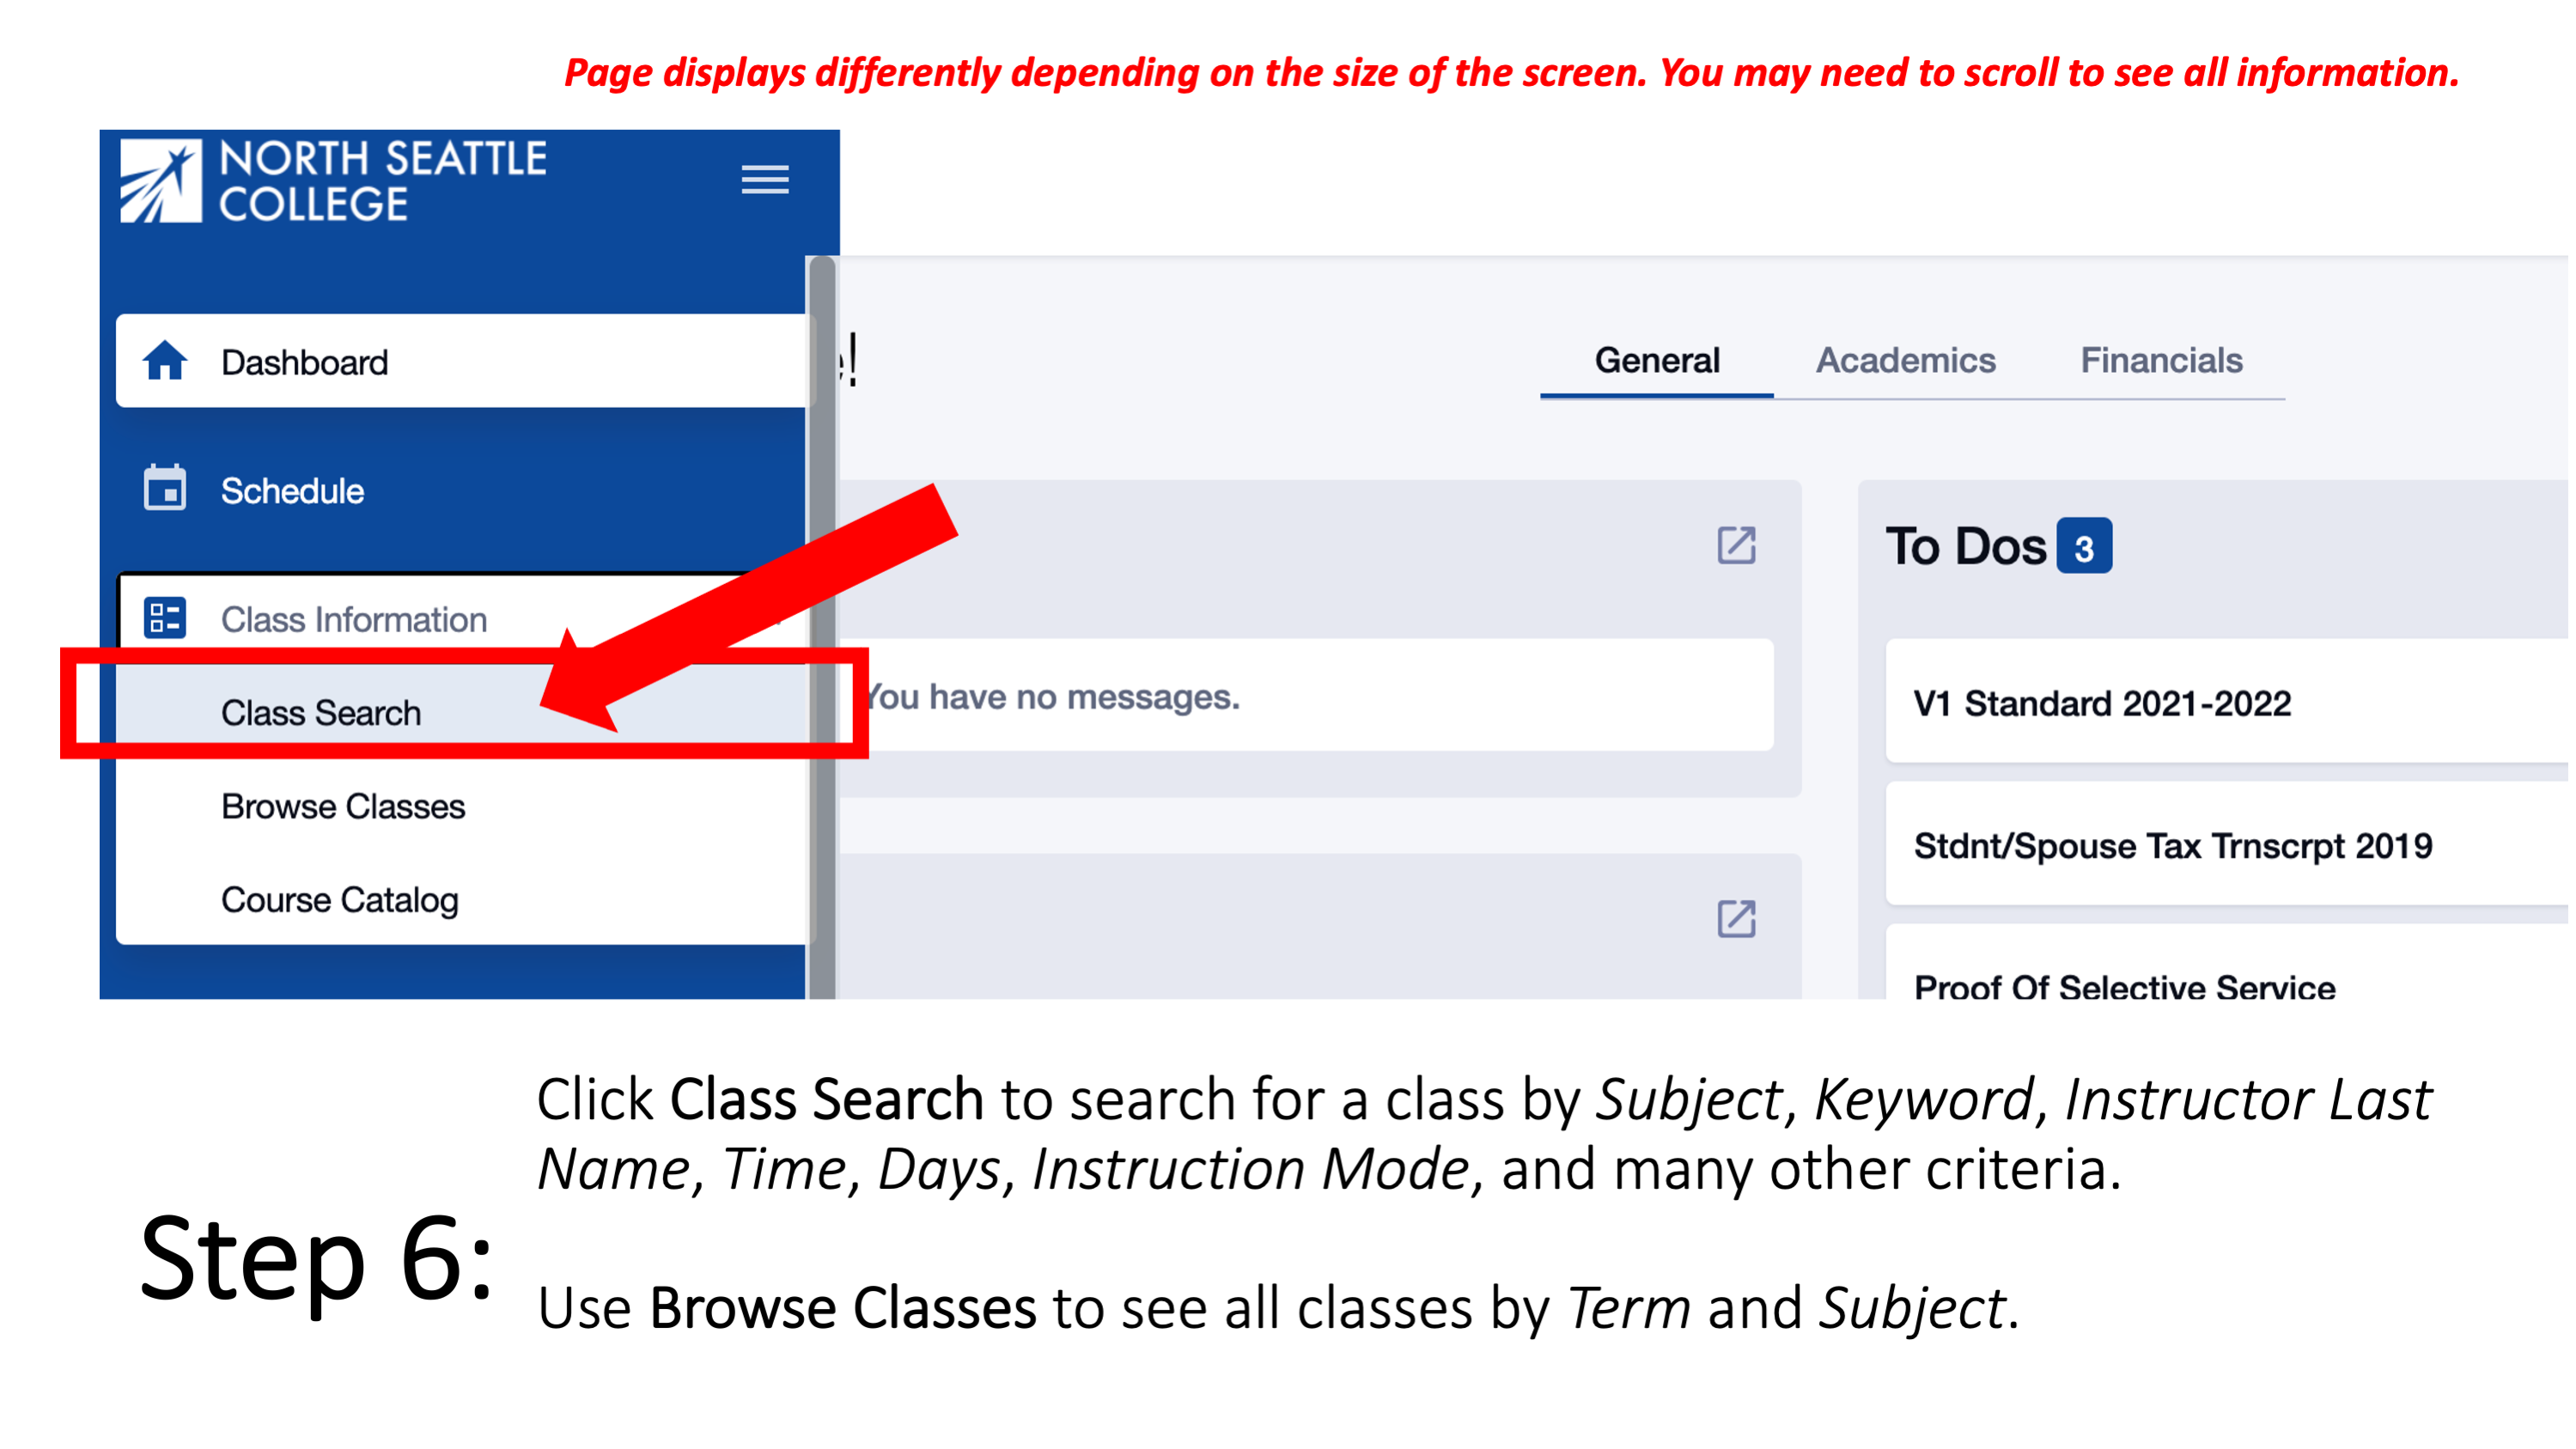 Step 6: Click Class Search to search for a class by Subject, Keyword, Instructor Last Name, Time, Days, Instruction Mode, and many other criteria. Use Browse Classes to see all classes by Term and Subject. Page displays differently depending on the size of the screen. You may need to scroll to see all information.